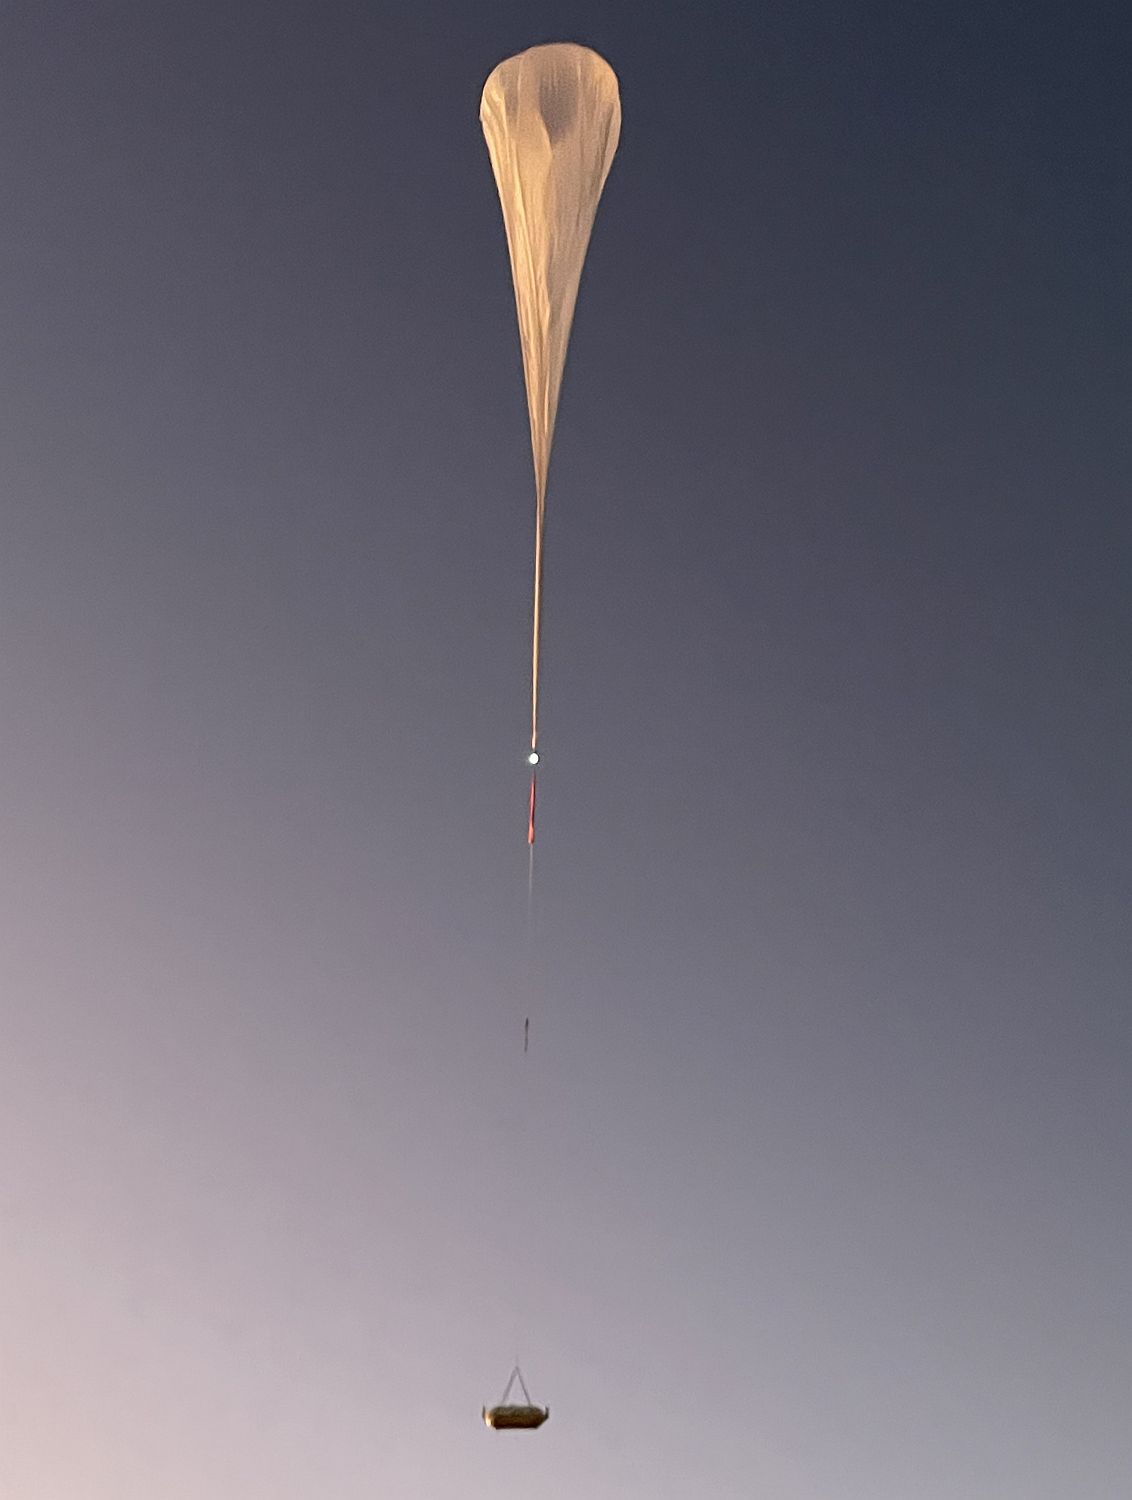 The balloon ascending with the payload.